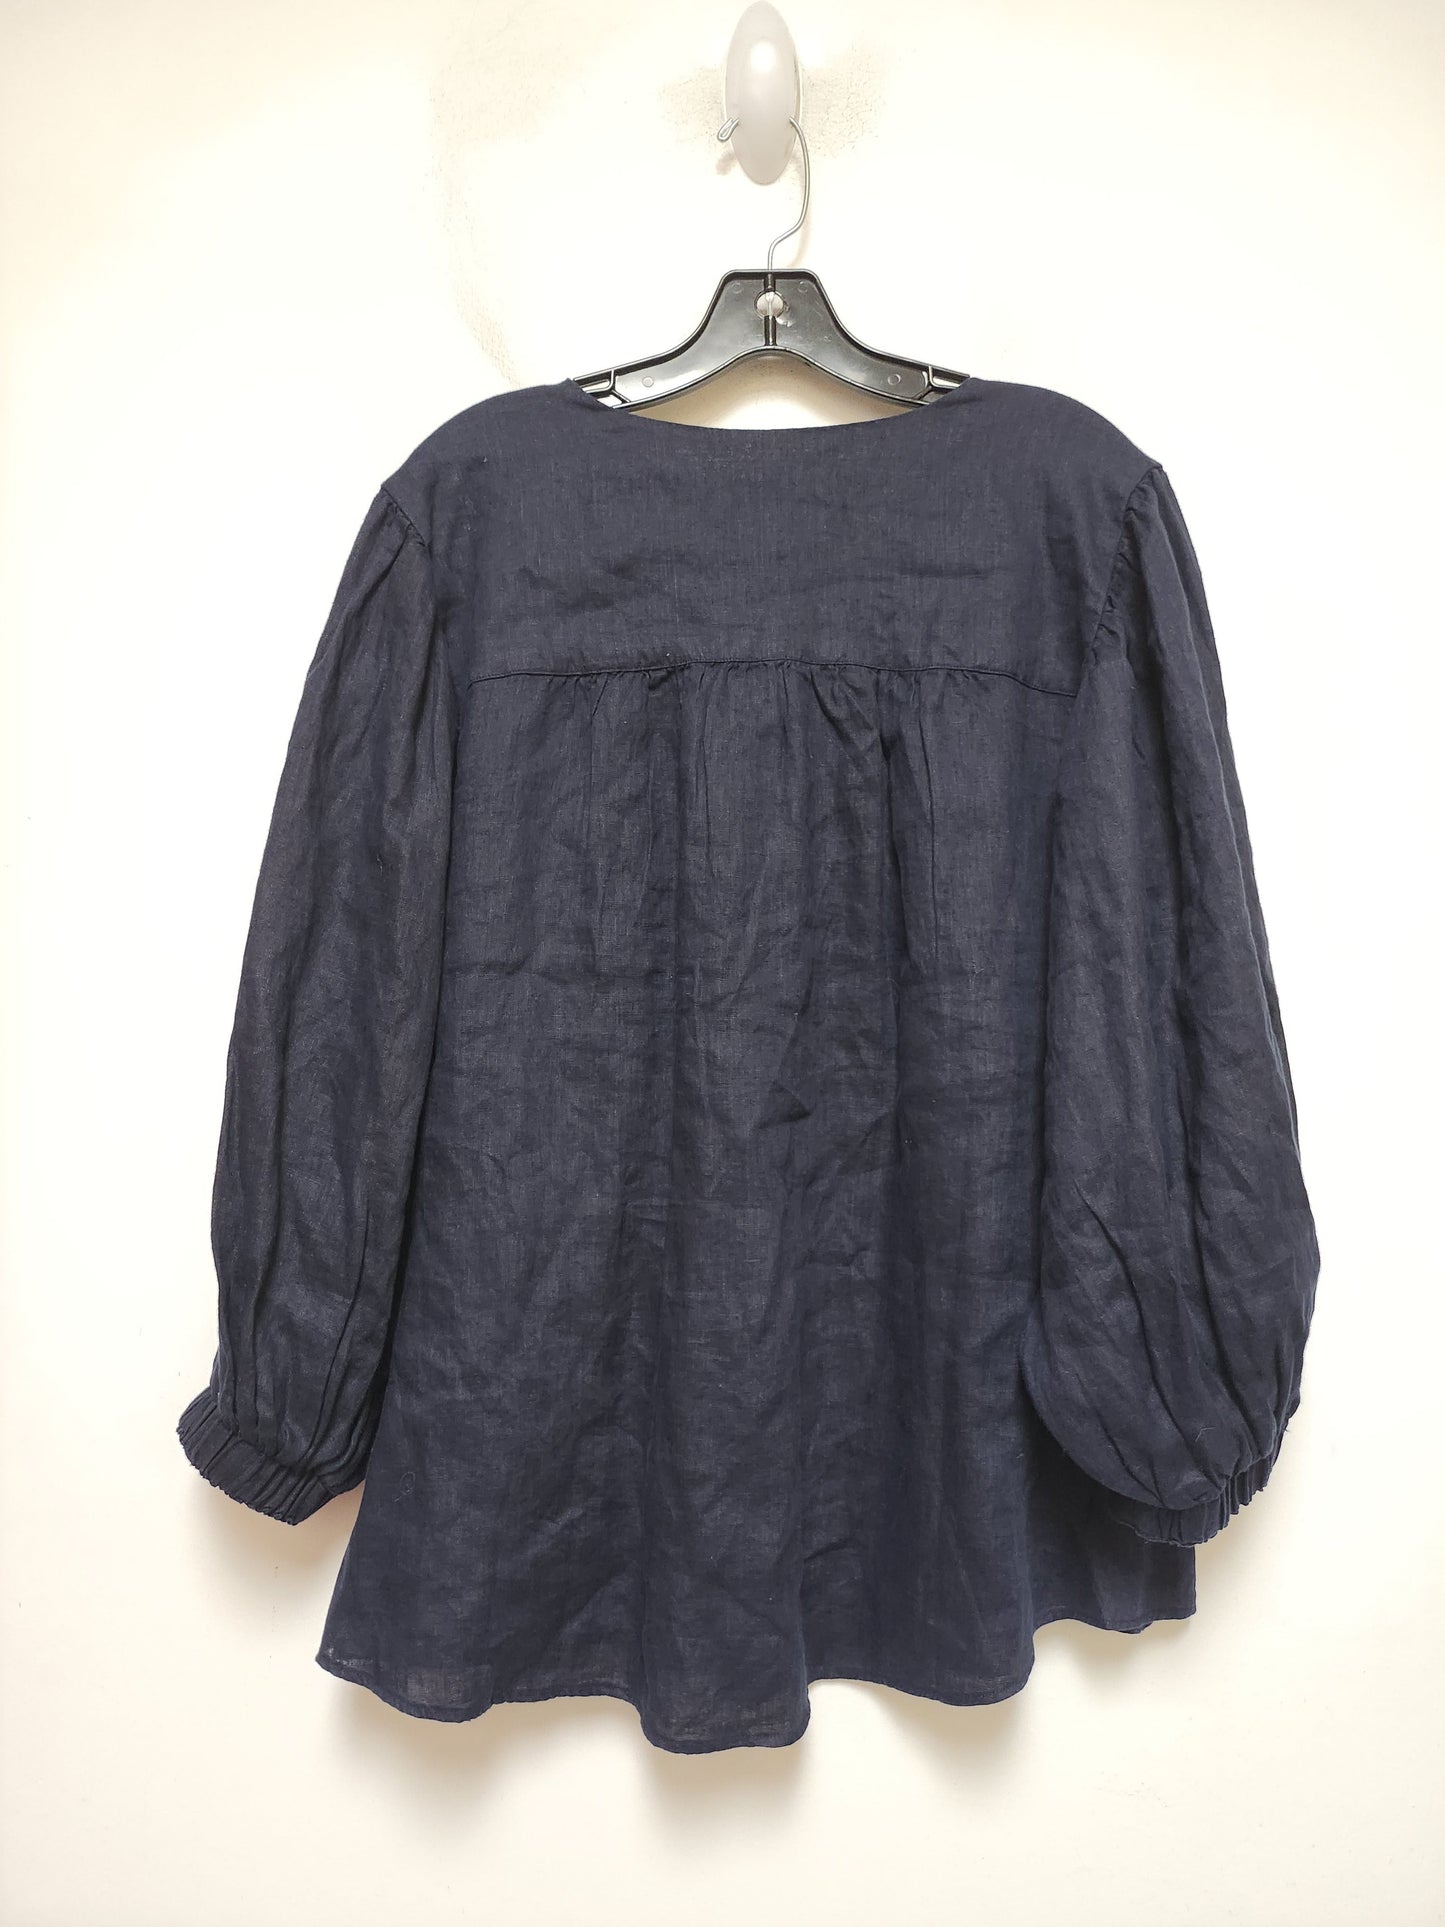 Navy Top Short Sleeve Chicos, Size 2x